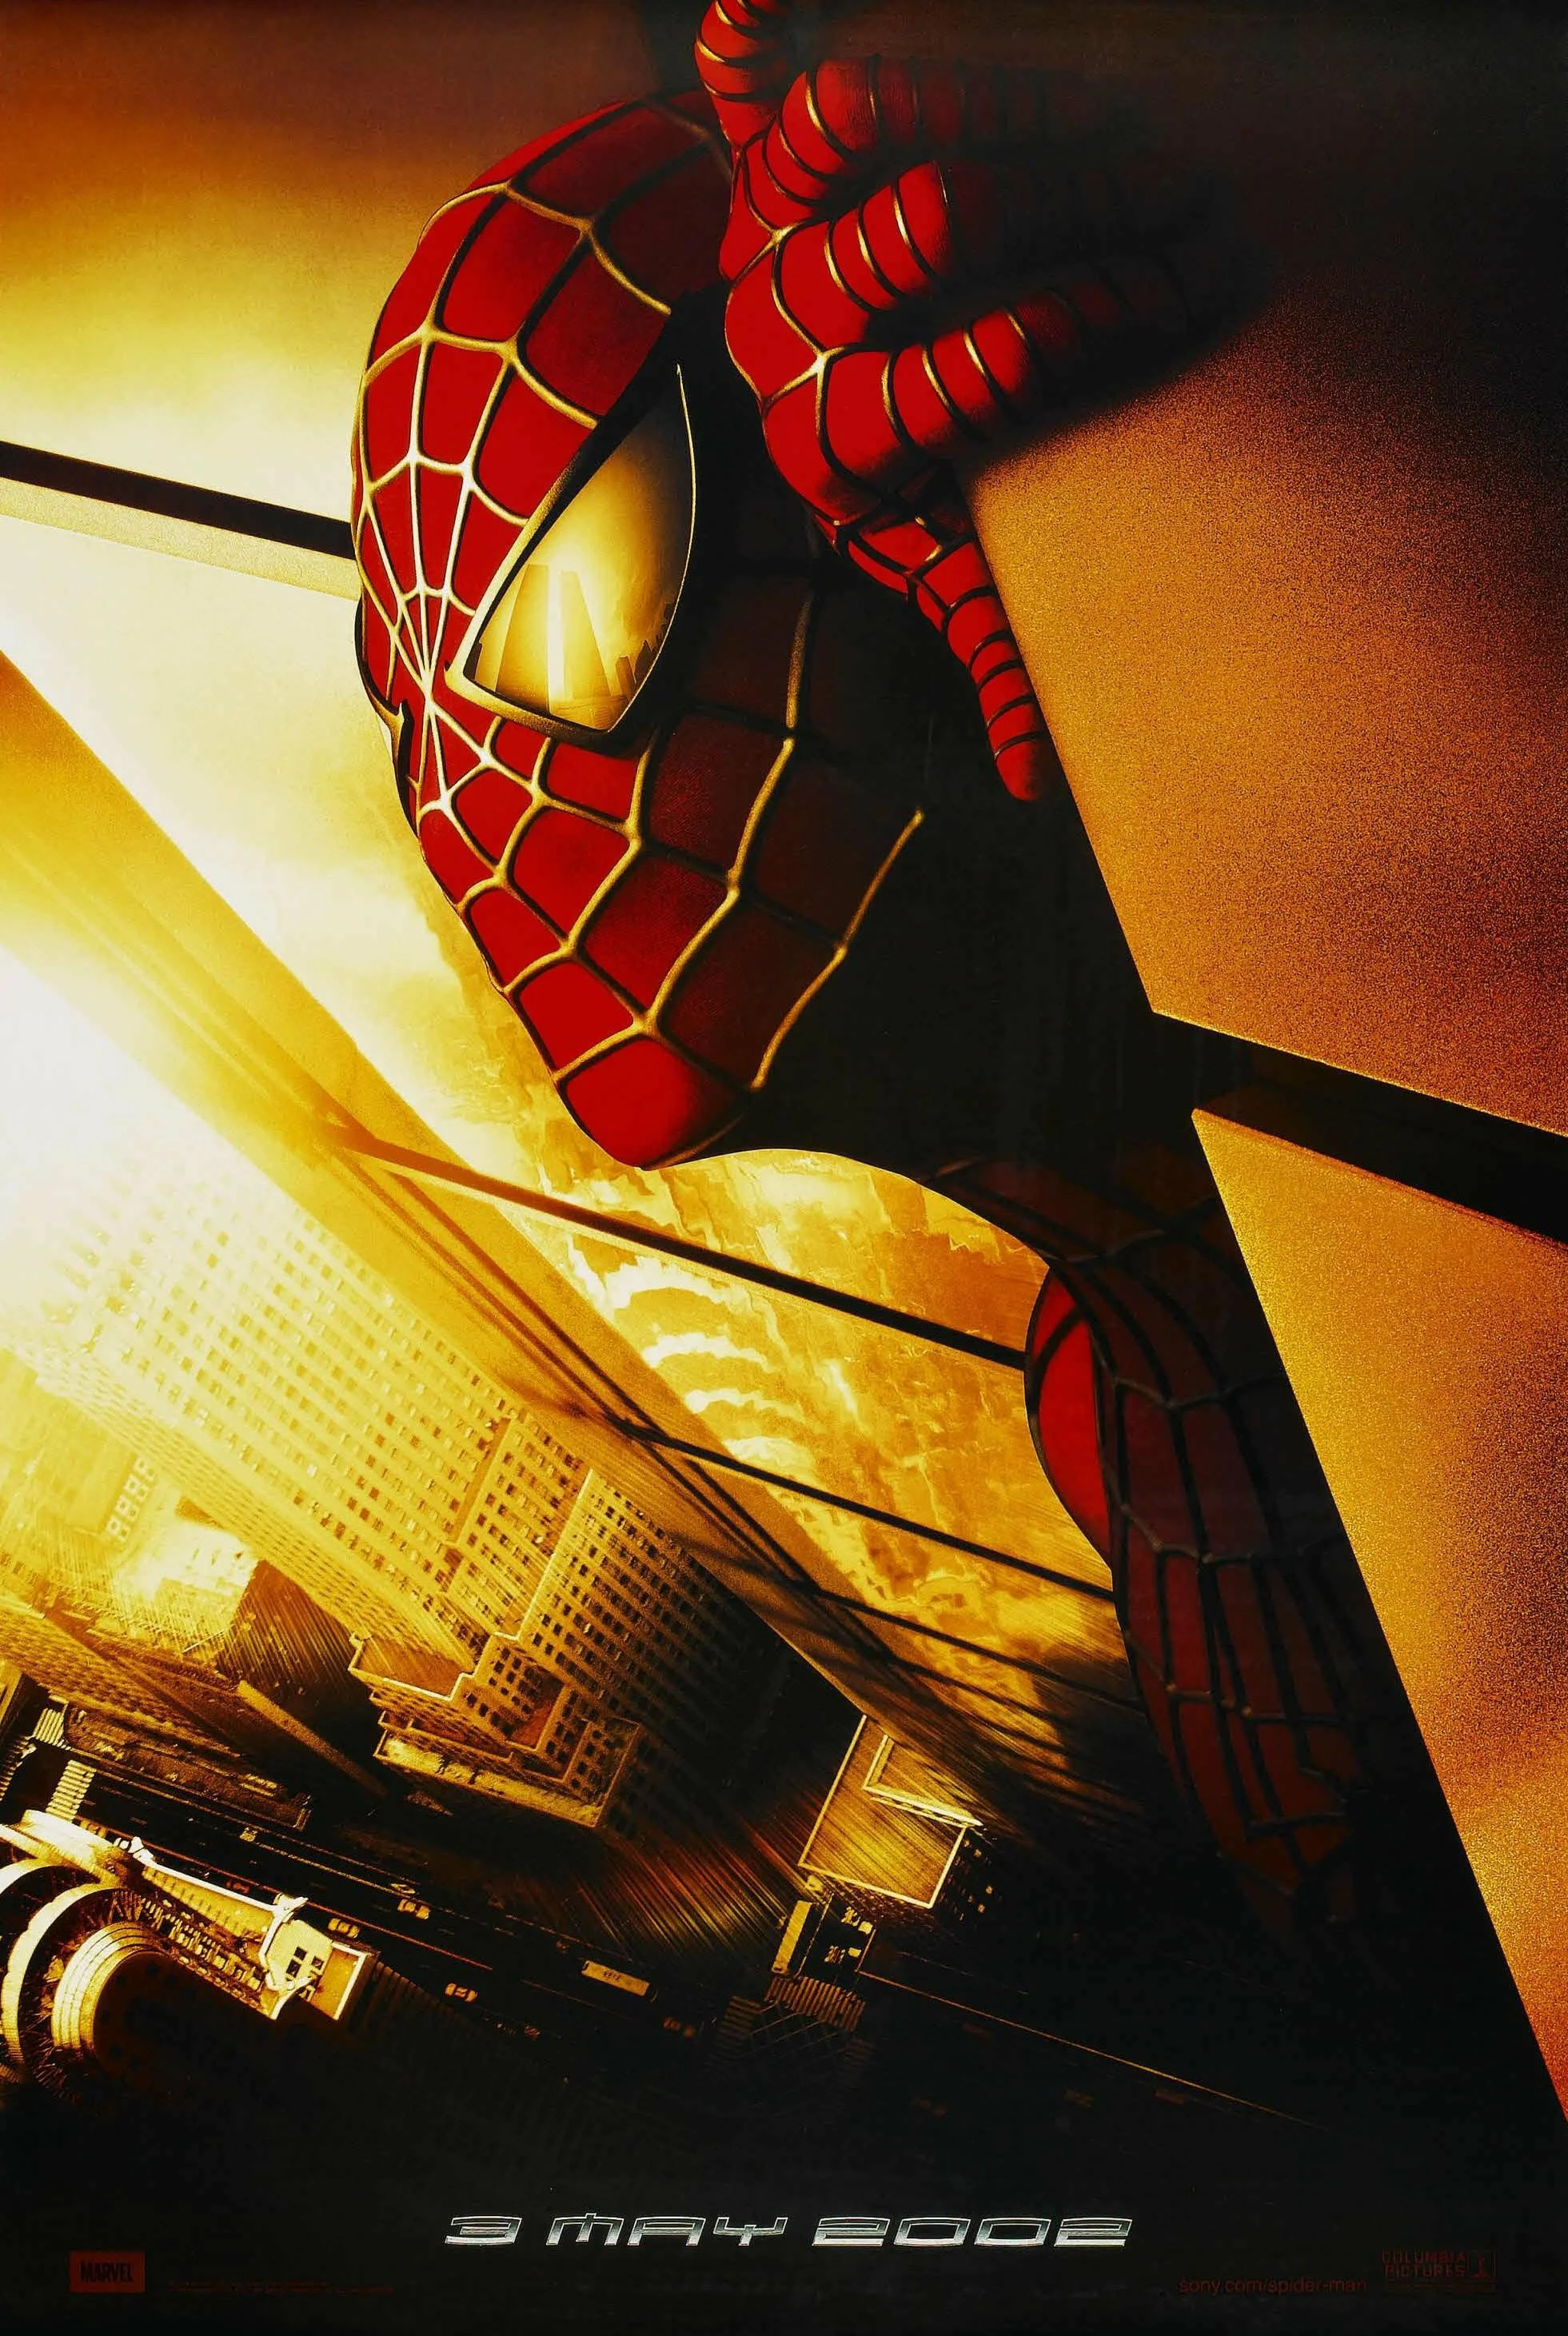 20 years since 'Spider-Man' changed the fate of superheroes